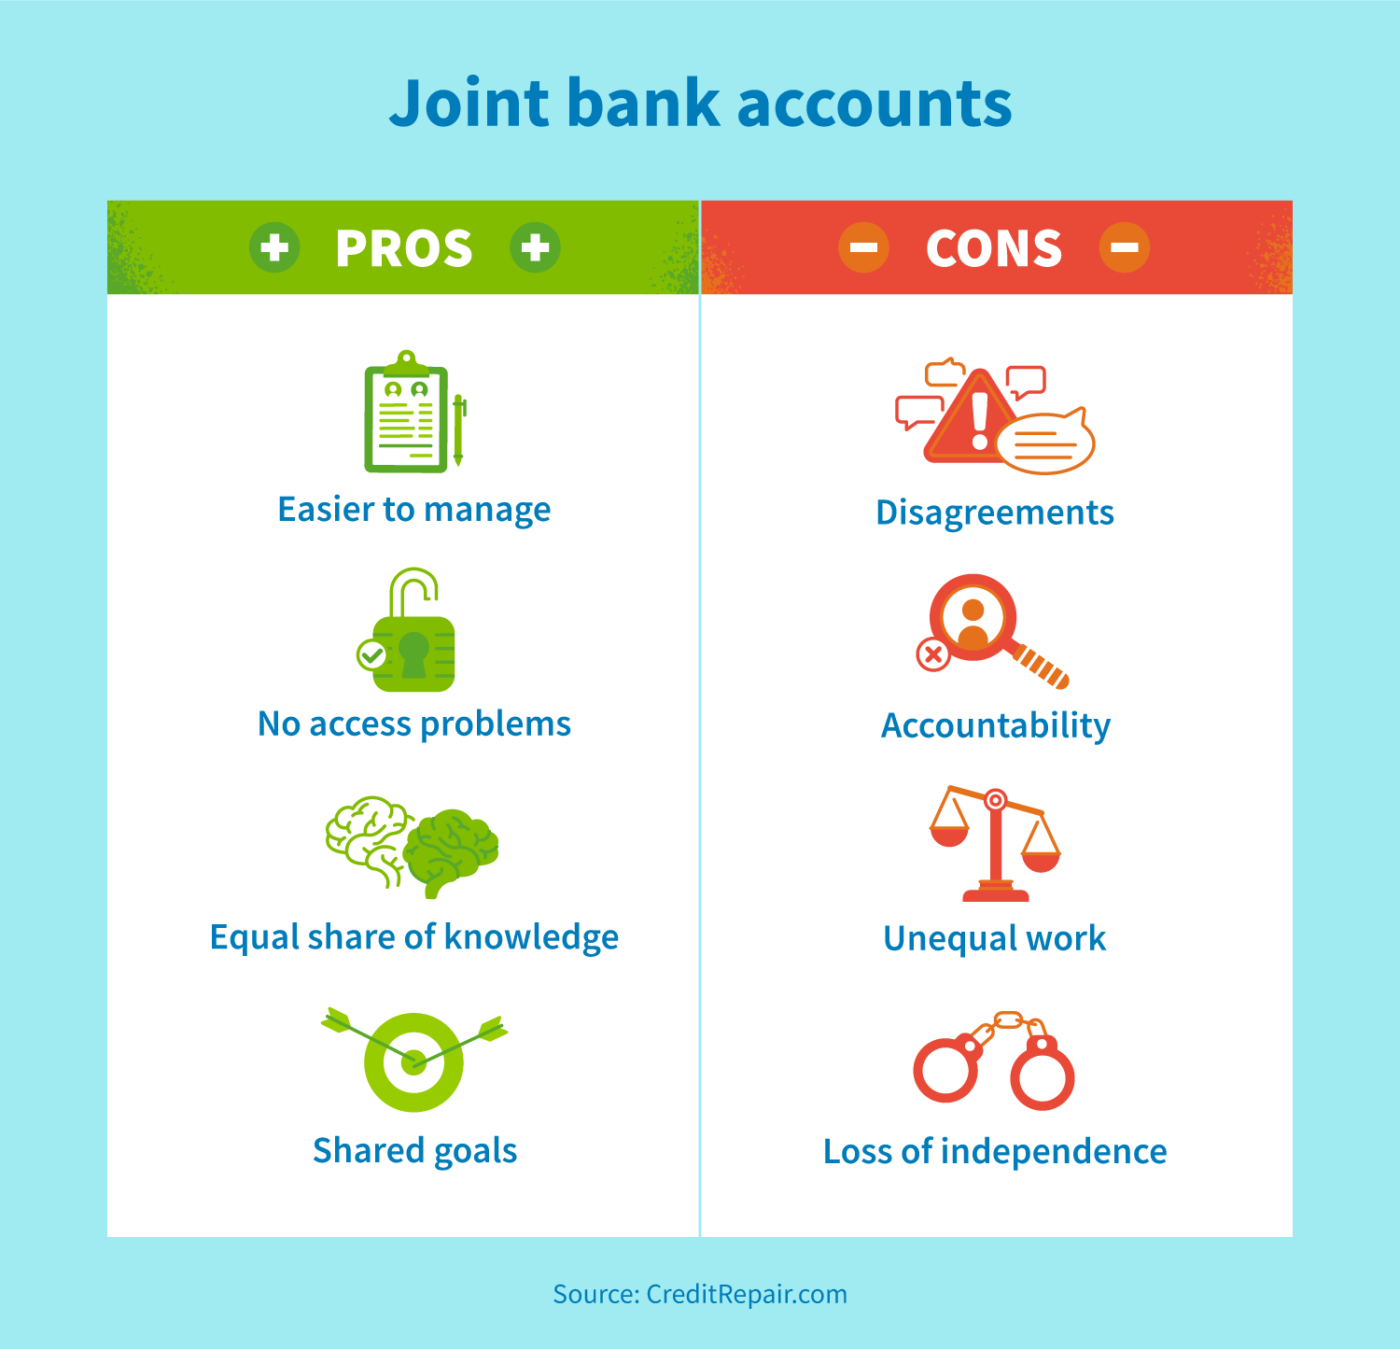 What is a joint bank account?